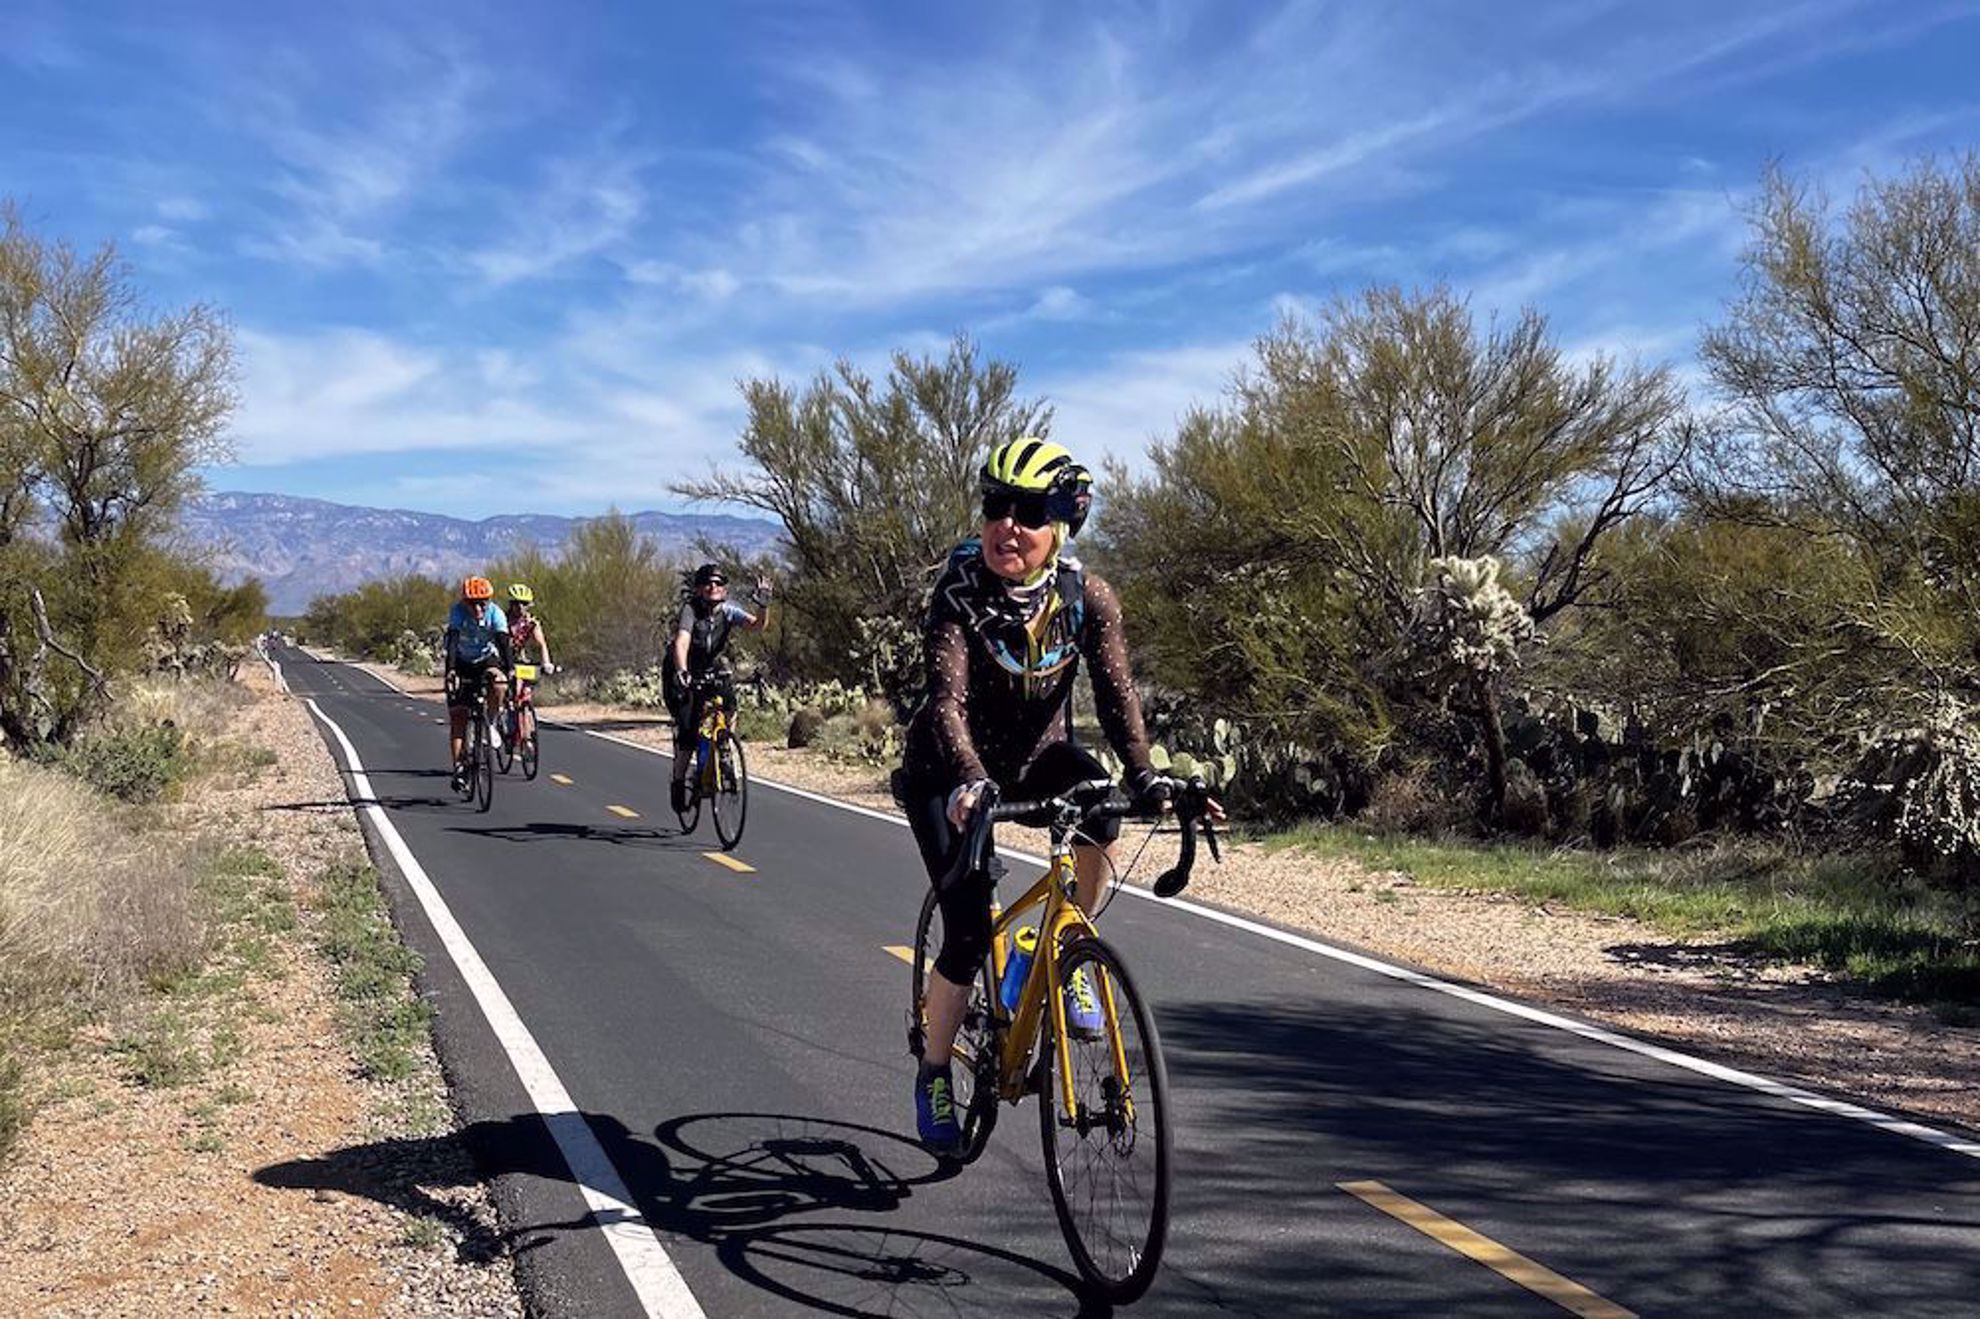 Riding along Tucson Valley